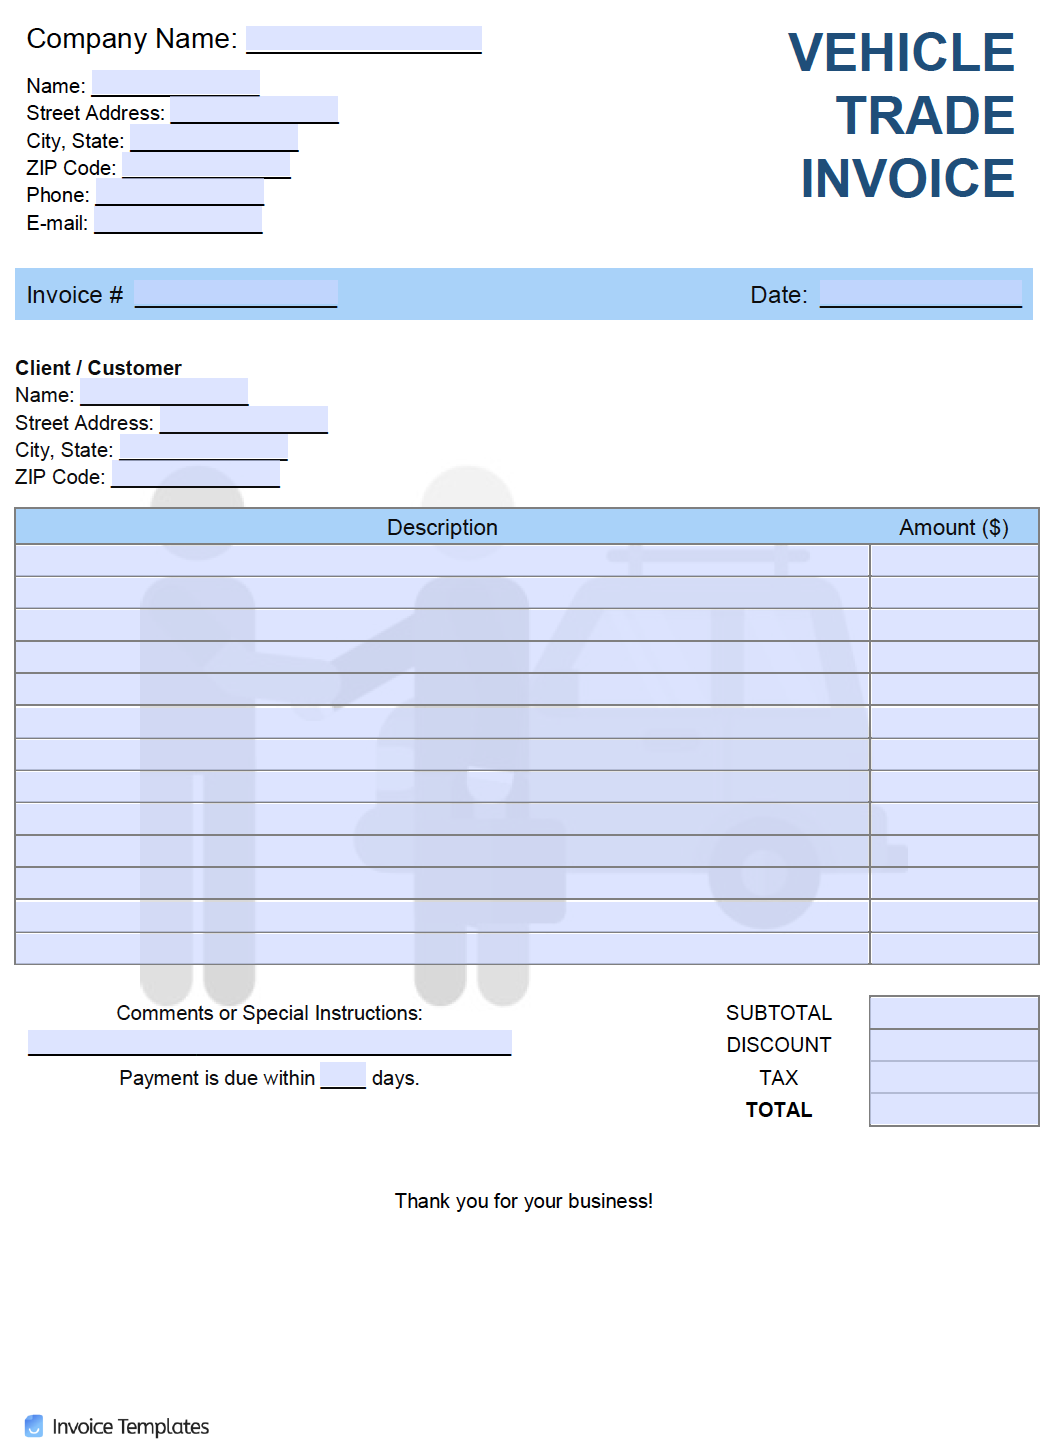 Free Vehicle Trade Invoice Template  PDF  WORD  EXCEL In Car Sales Invoice Template Free Download